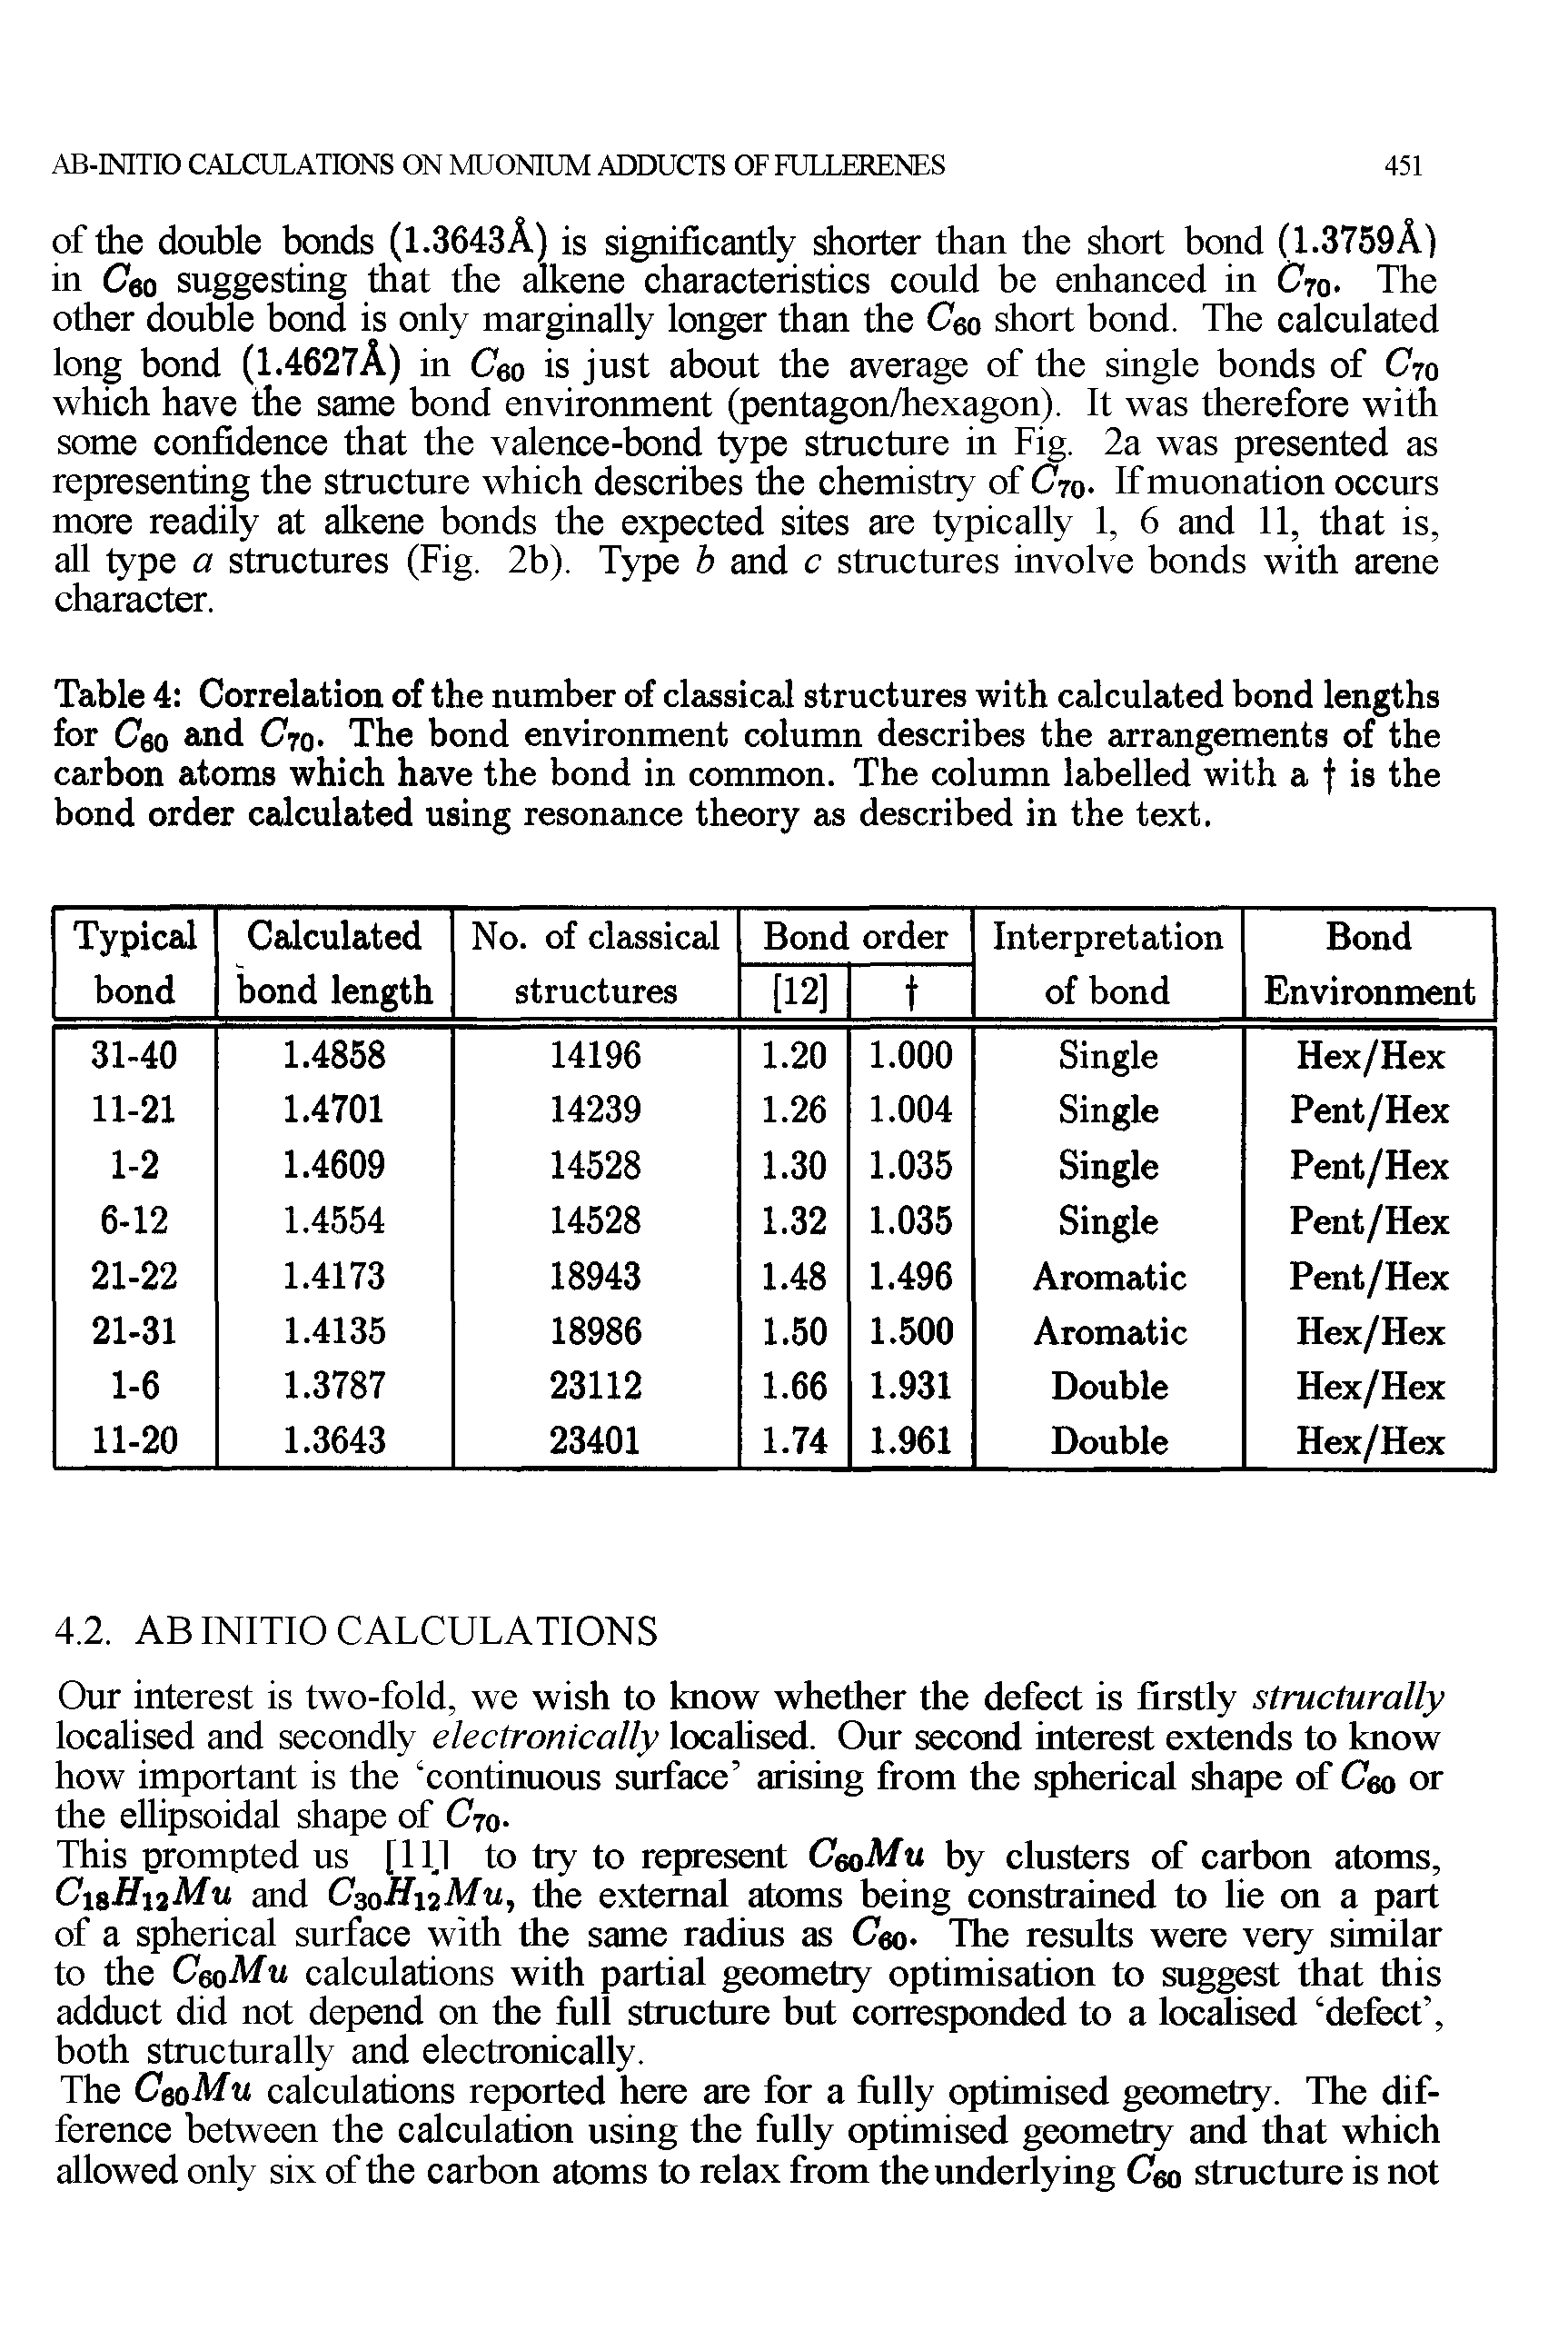 Table 4 Correlation of the number of classical structures with calculated bond lengths for Ceo and Cn. The bond environment column describes the arrangements of the carbon atoms which have the bond in common. The column labelled with a f is the bond order calculated using resonance theory as described in the text.